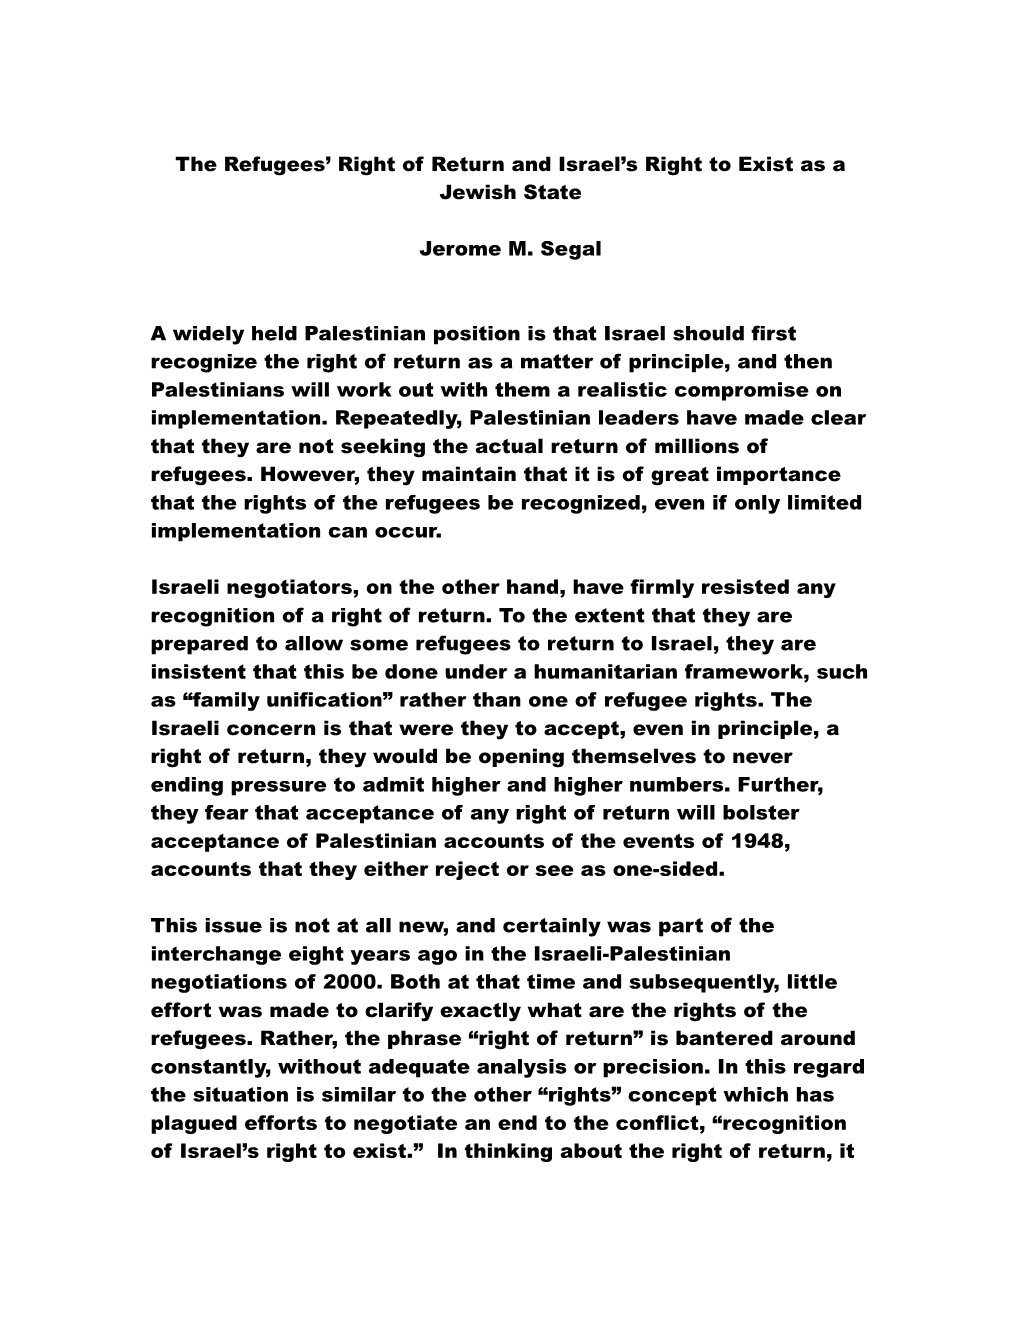 The Refugees' Right of Return and Israel's Right to Exist As a Jewish